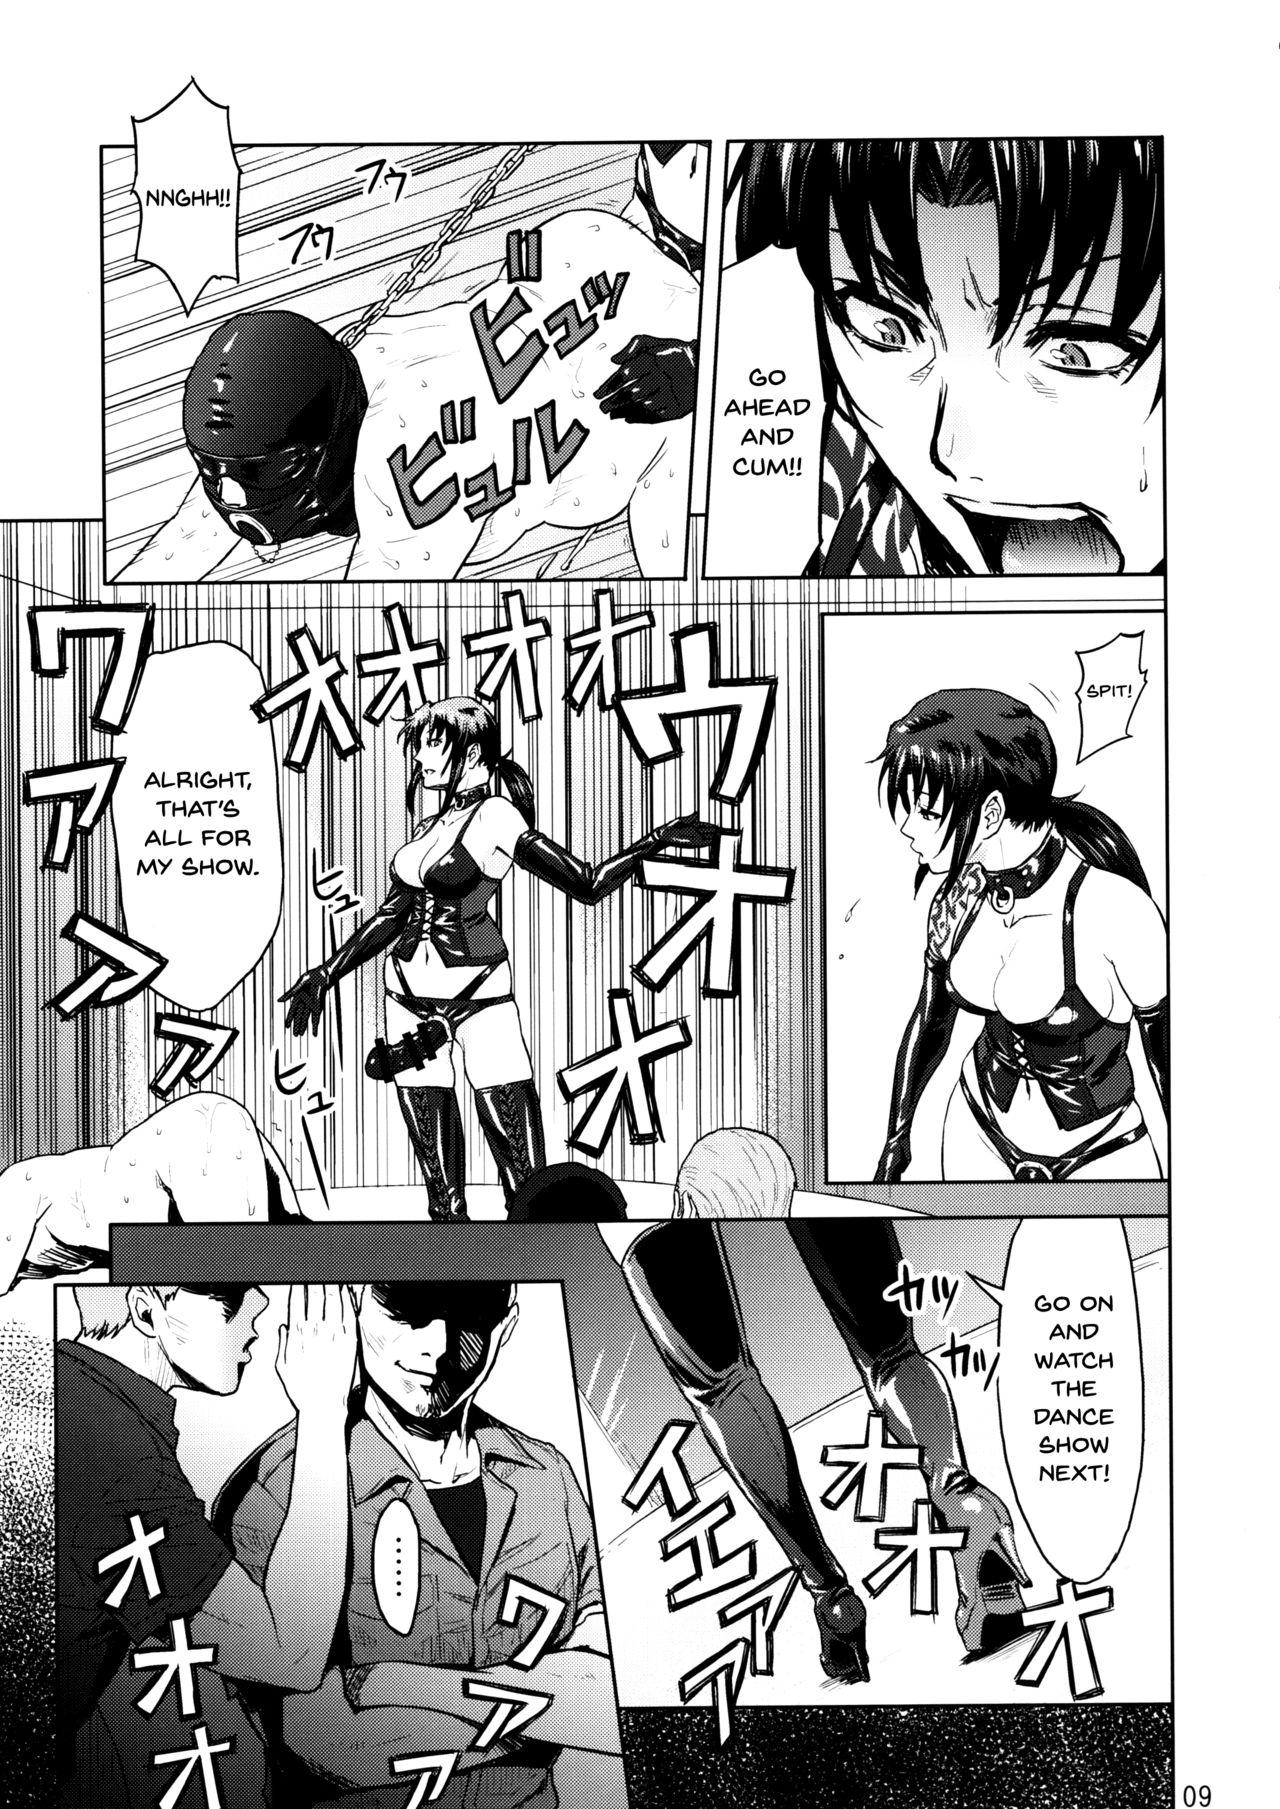 Indonesian Dressing Room - Black lagoon Amatures Gone Wild - Page 9